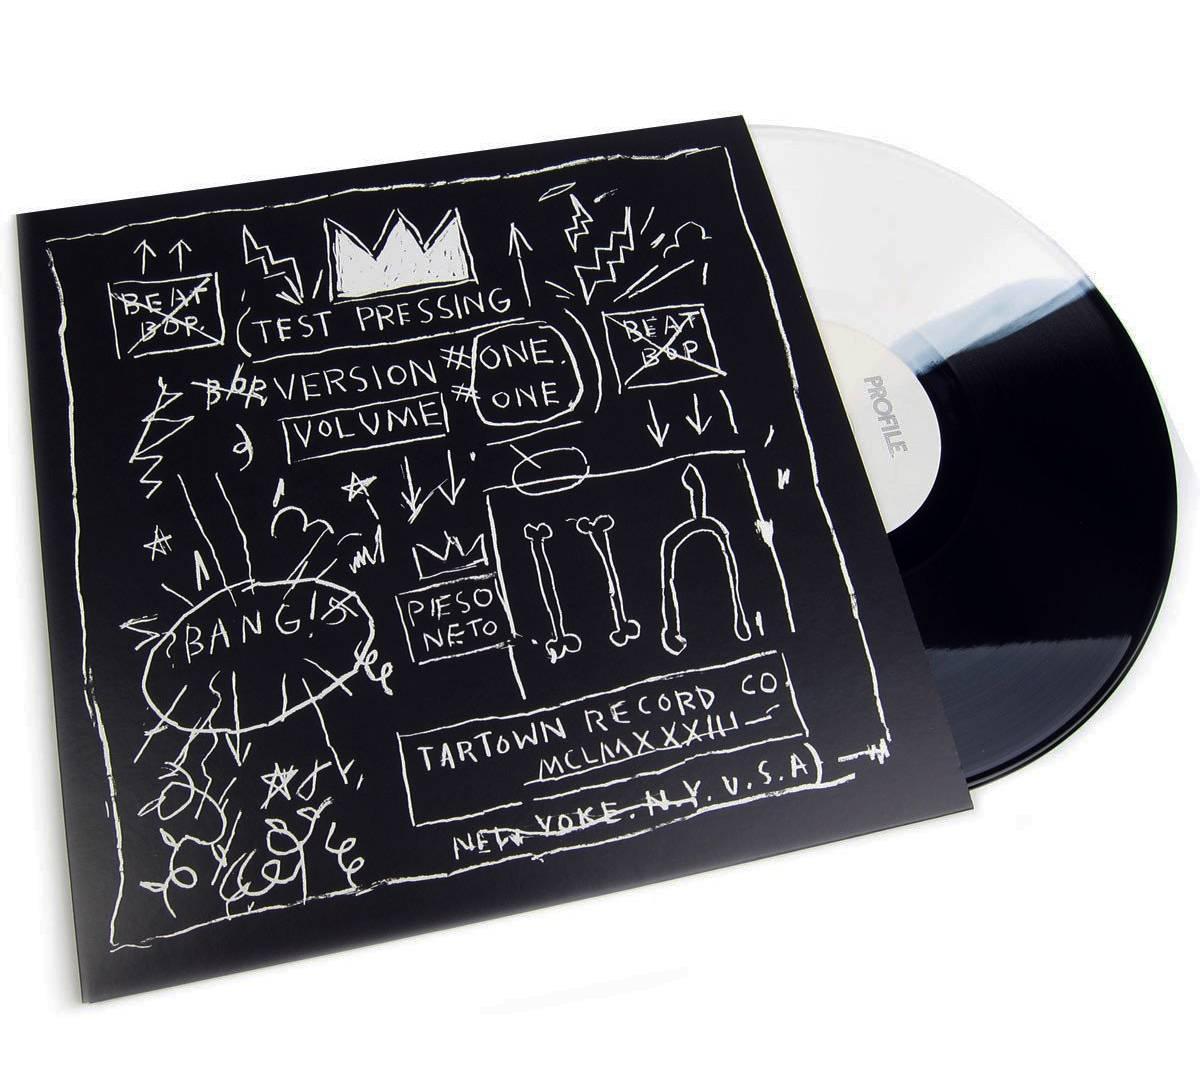 30th anniversary pressing of Basquiat's historic Beat Bop vinyl record (1983), featuring Jean Michel's signature cover art and production as well as licensed trademark by the Estate of Jean-Michel Basquiat. From a sold-out edition of 1983.